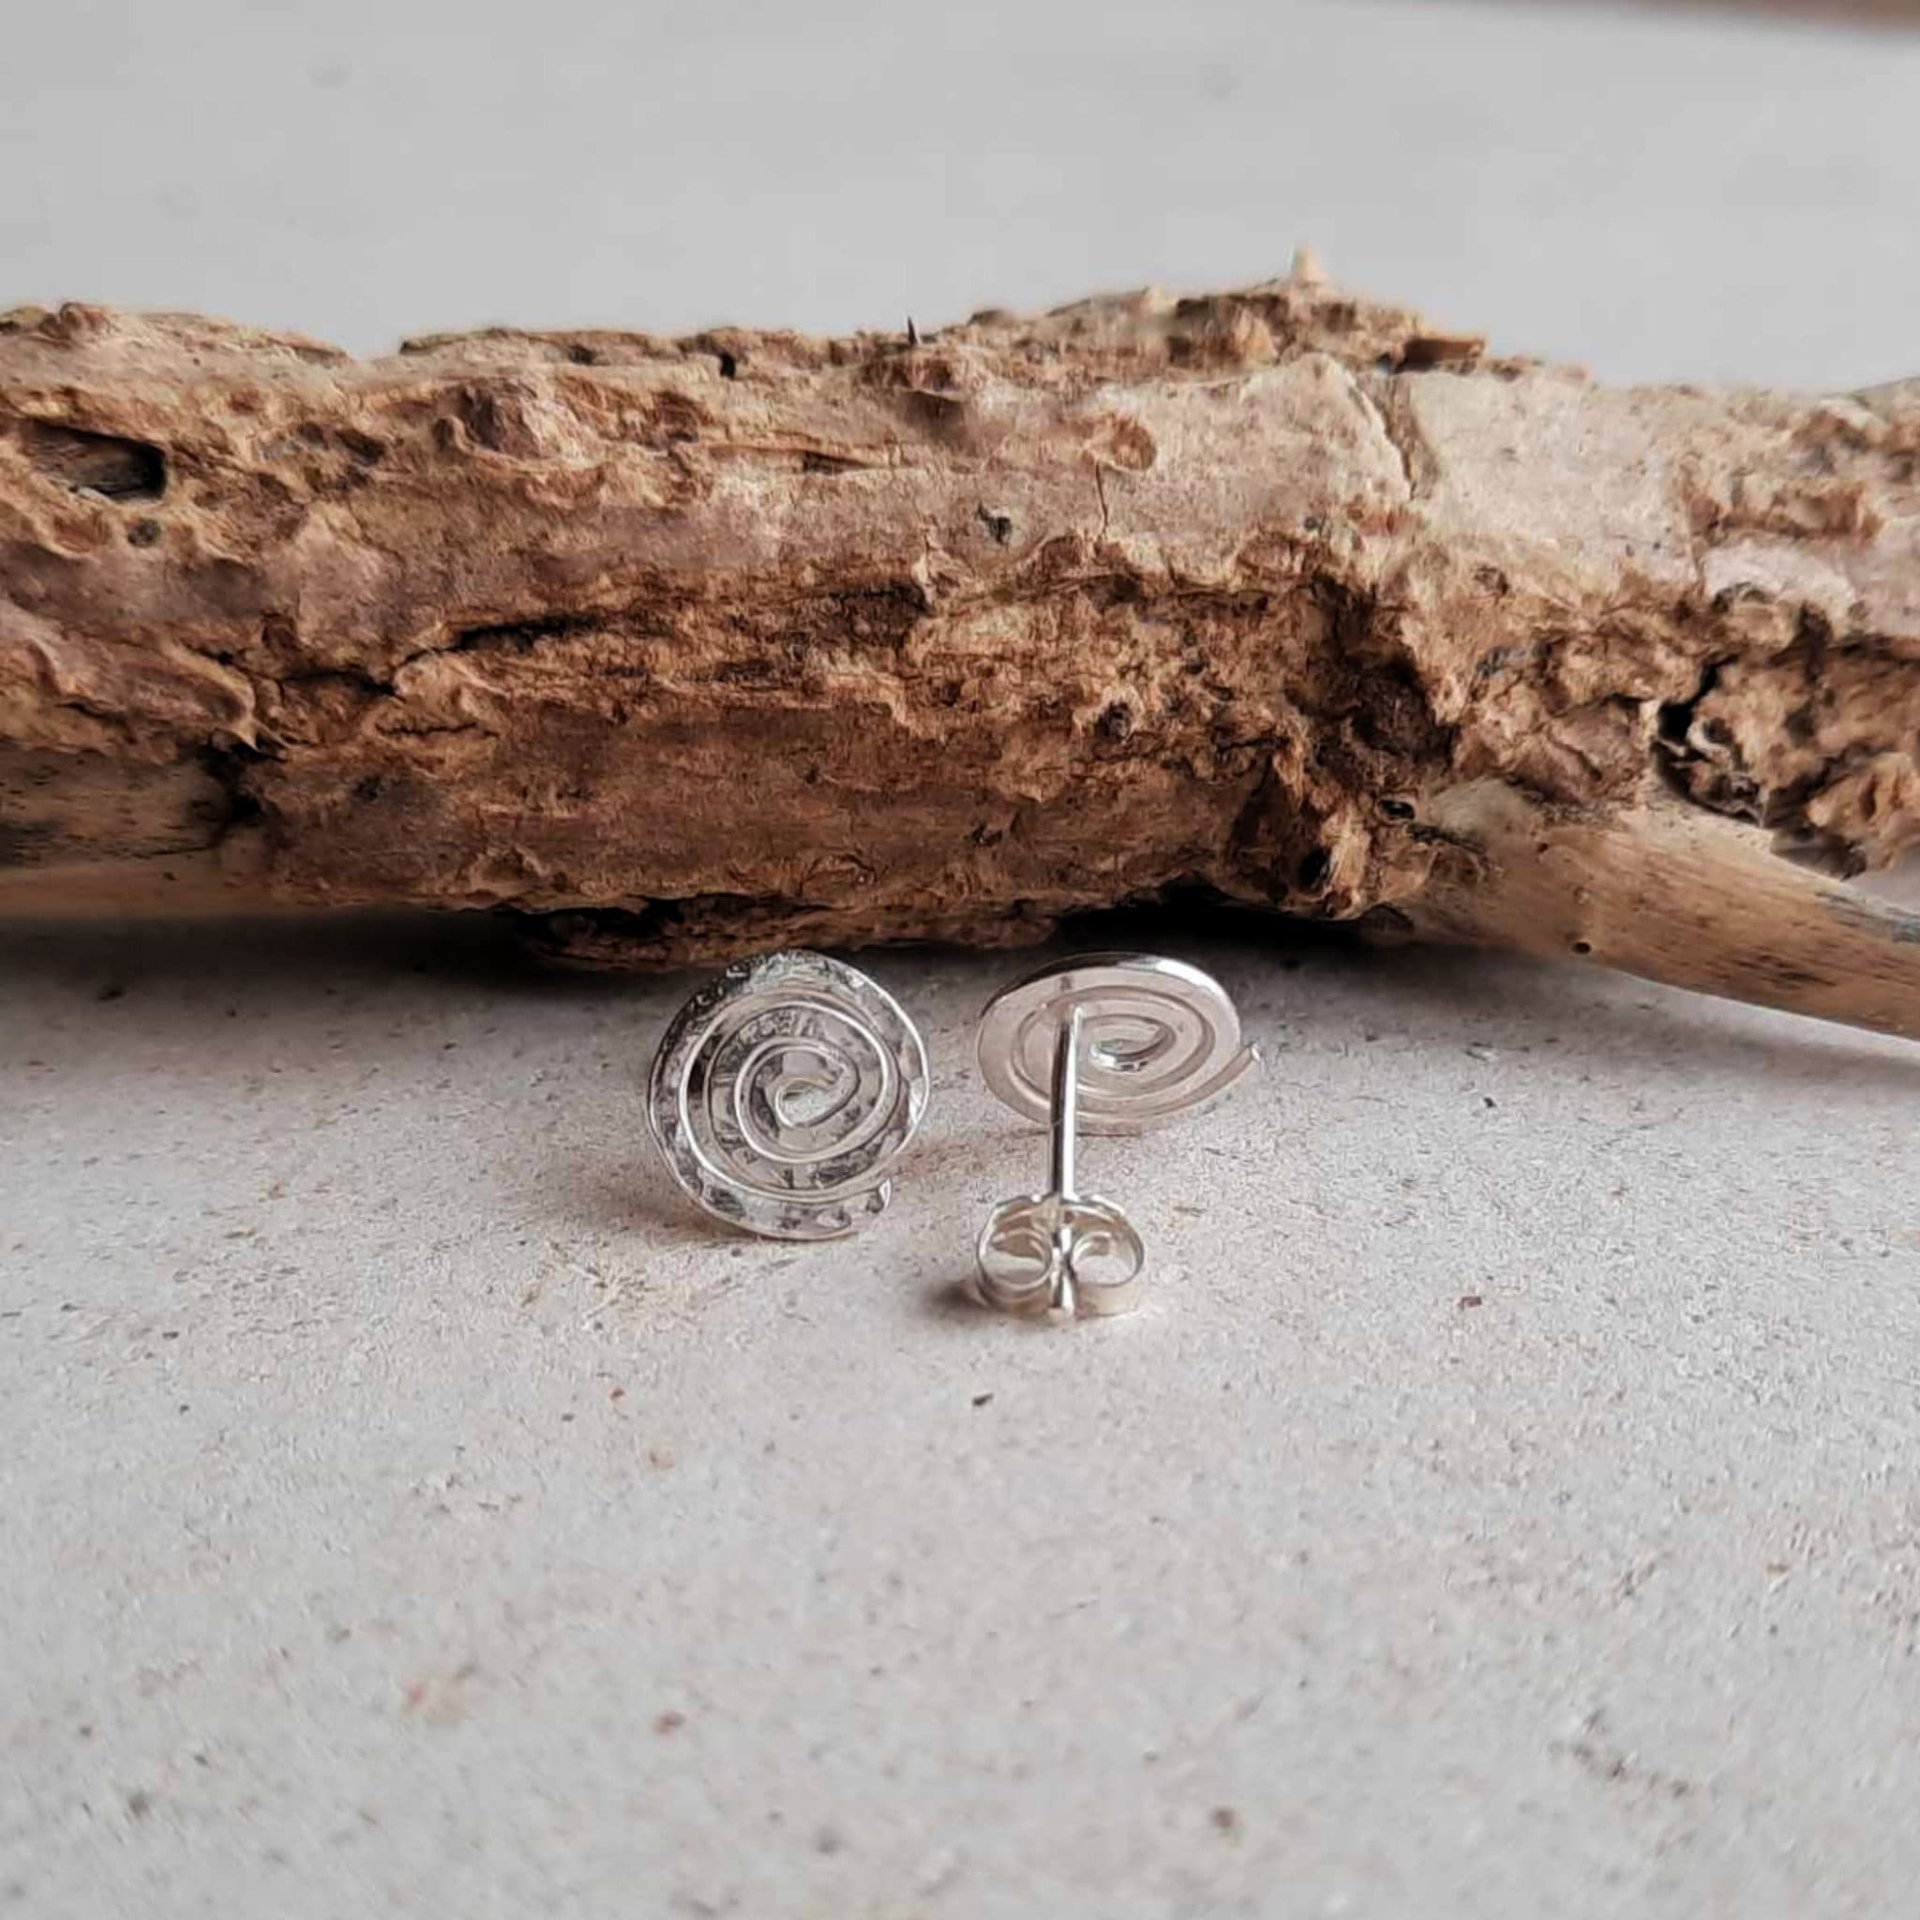 Eco friendly recycled and hammered sterling silver spiral studs, handcrafted by The Tiny Tree Frog Jewellery